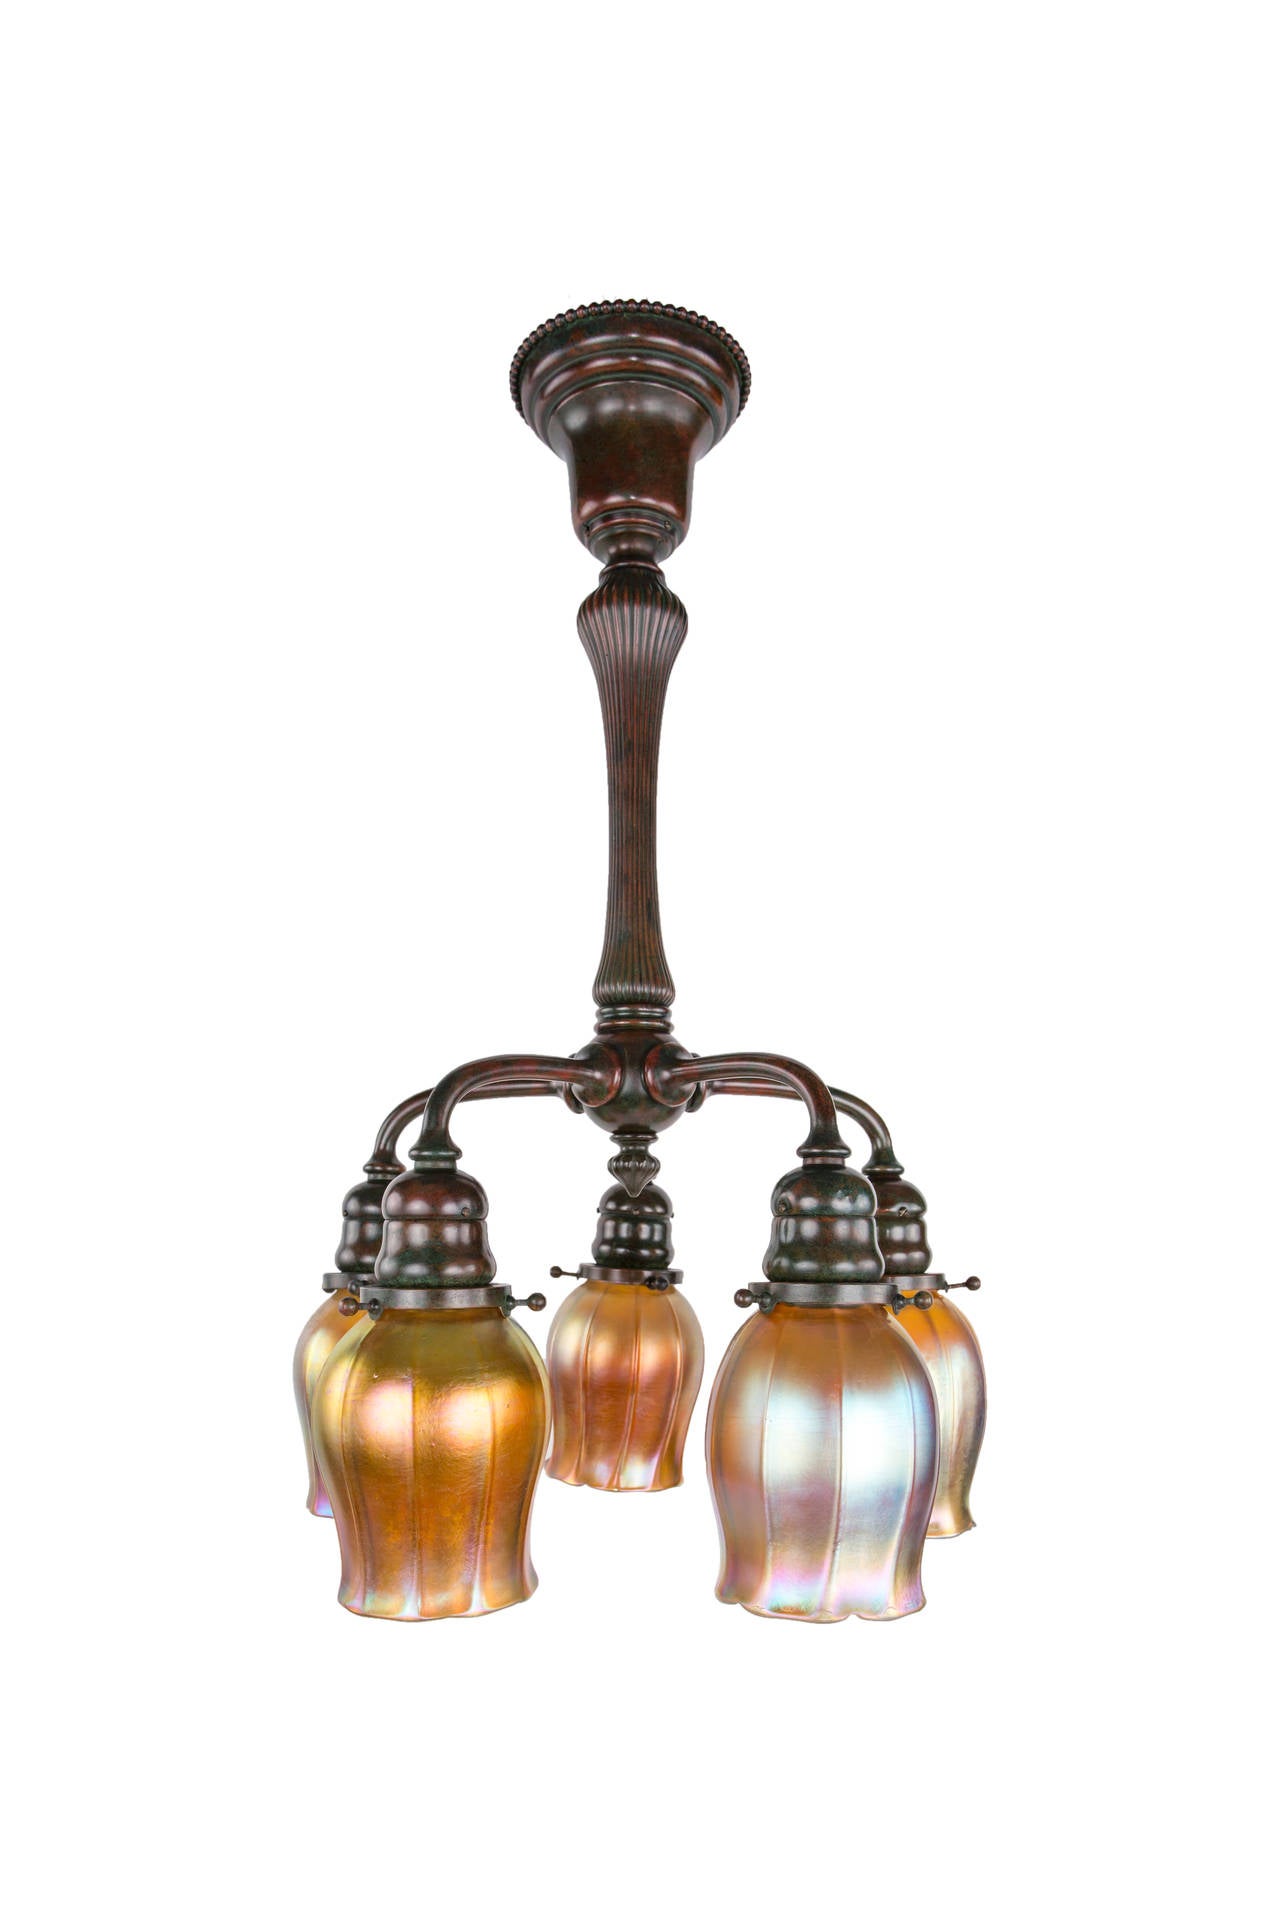 Patinated Pair of Art Nouveau Chandeliers by Tiffany Studios